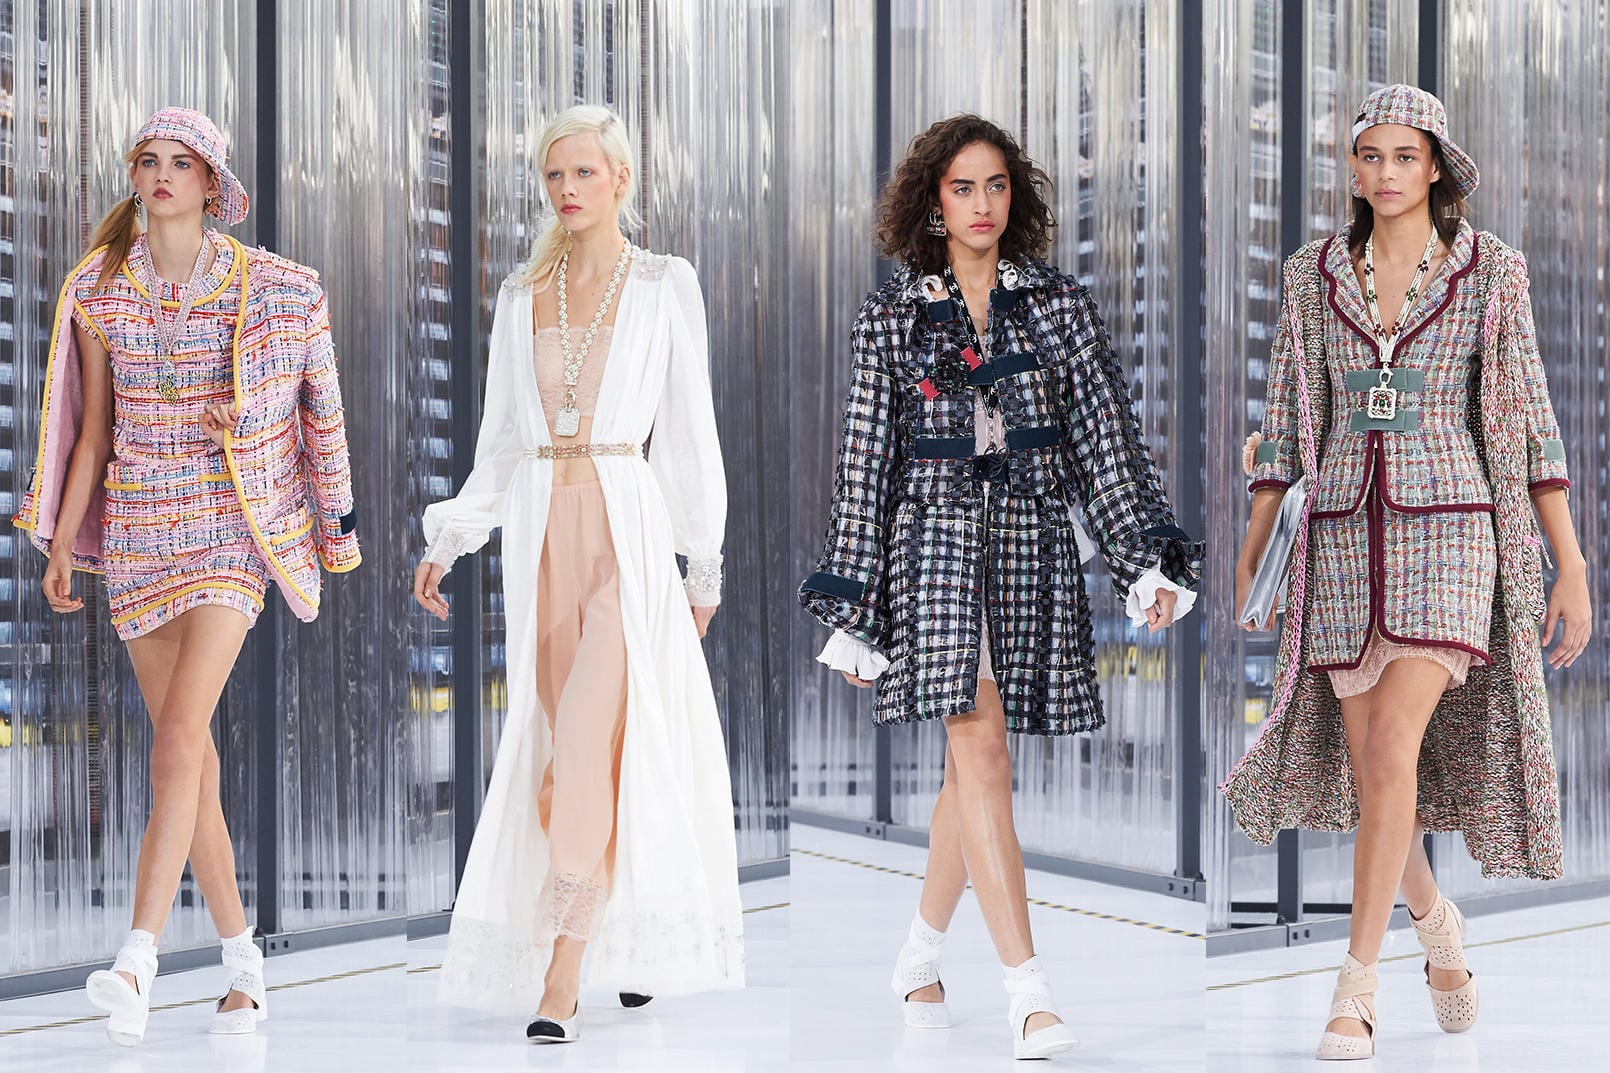 Every Look From the Chanel Spring 2017 Collection  Fashion, Paris fashion  week, Paris fashion week chanel